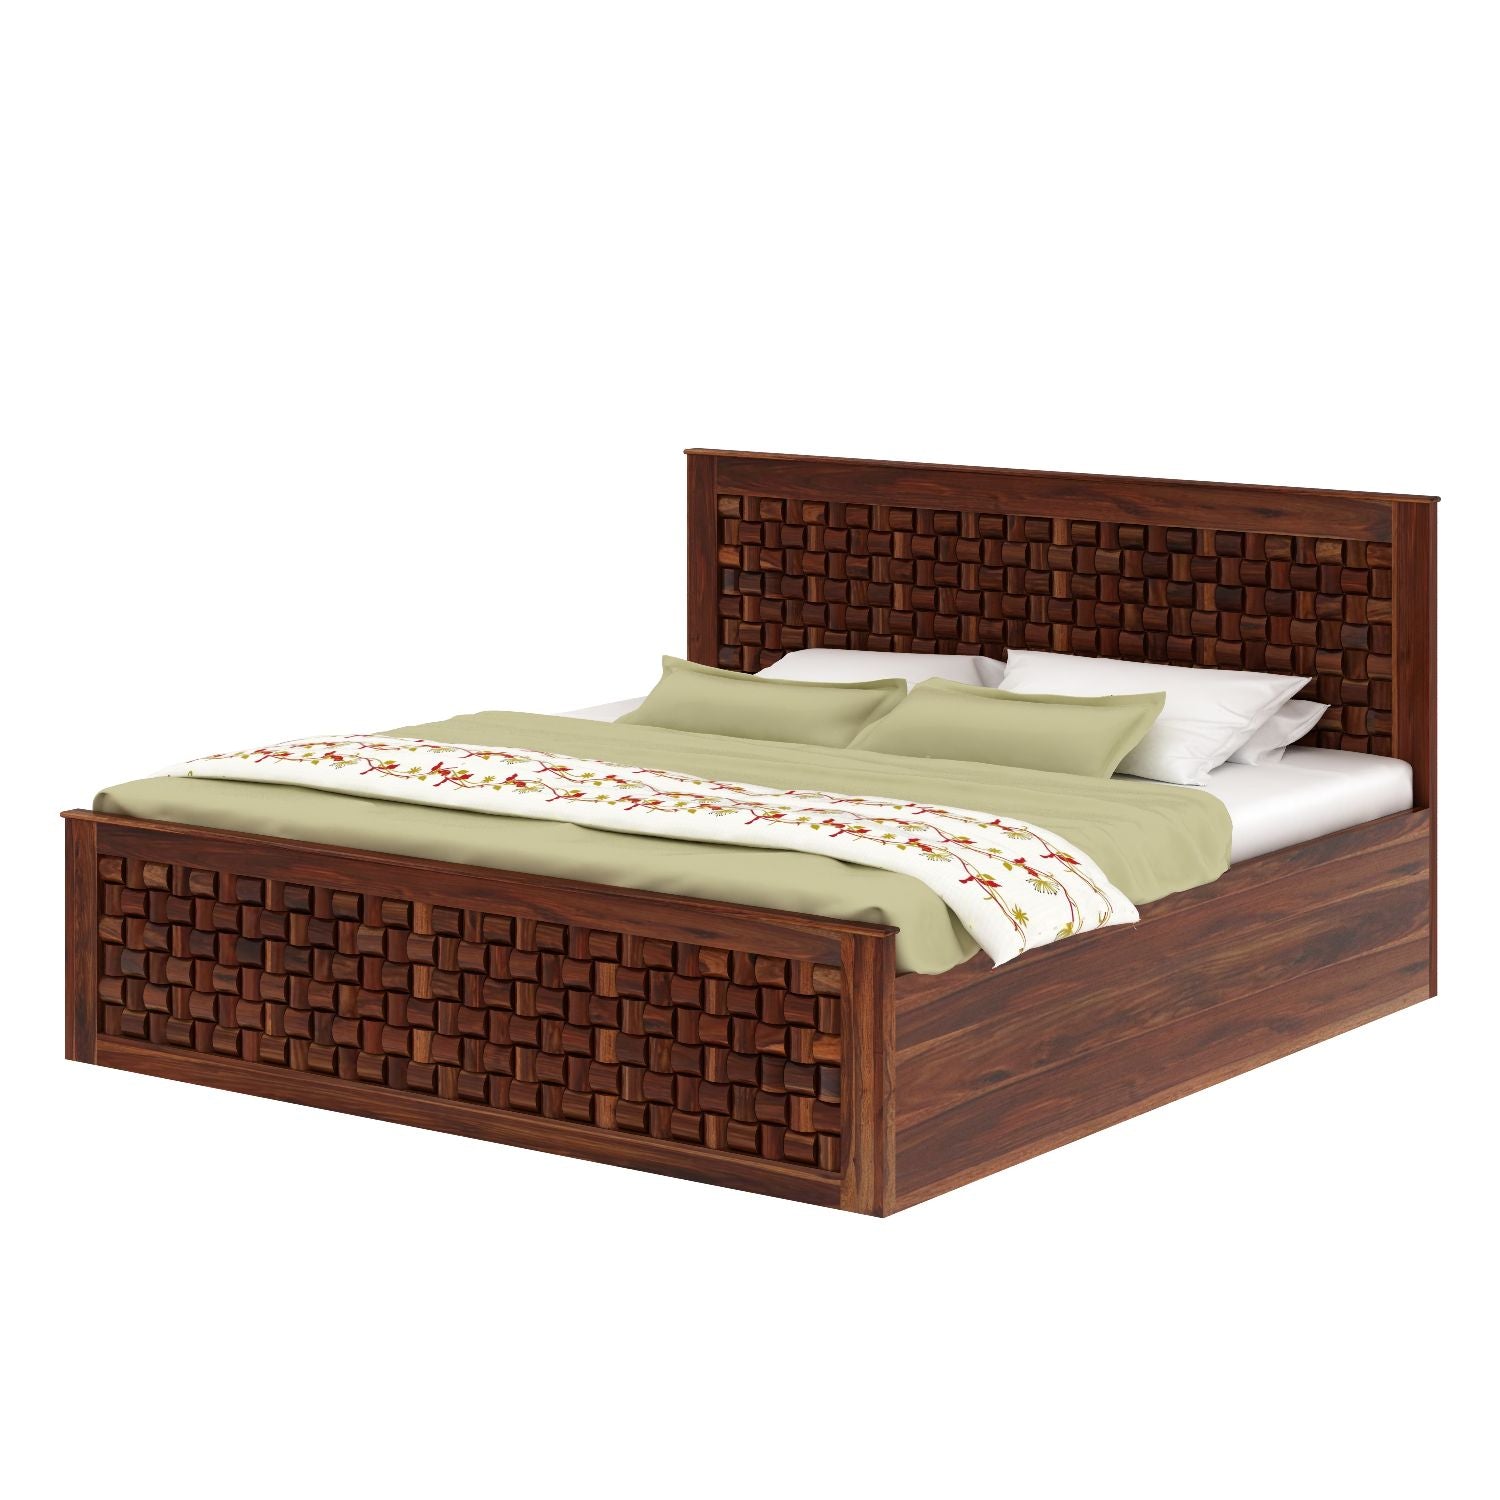 Olivia Solid Sheesham Wood Hydraulic Bed With Box Storage (Queen Size, Natural Finish)